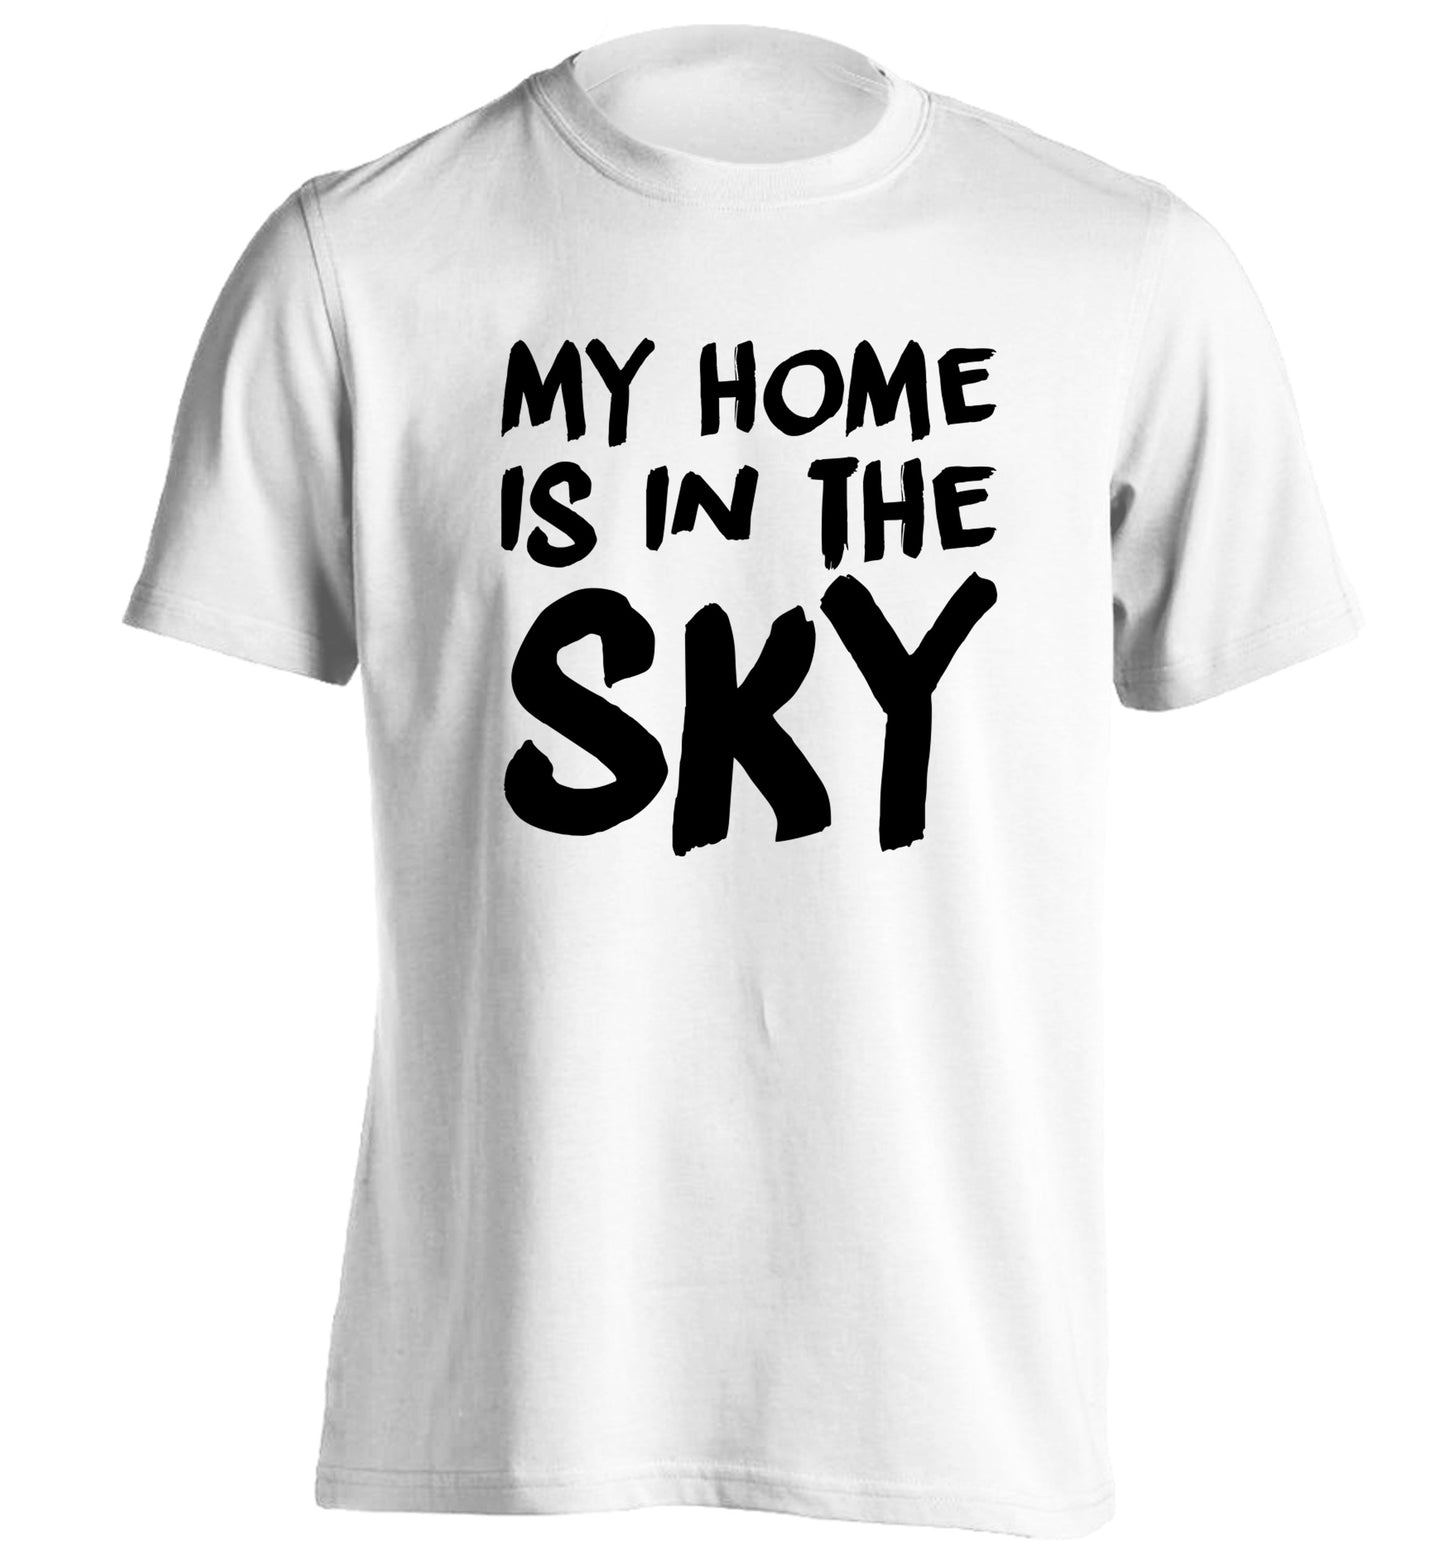 My home is in the sky adults unisex white Tshirt 2XL